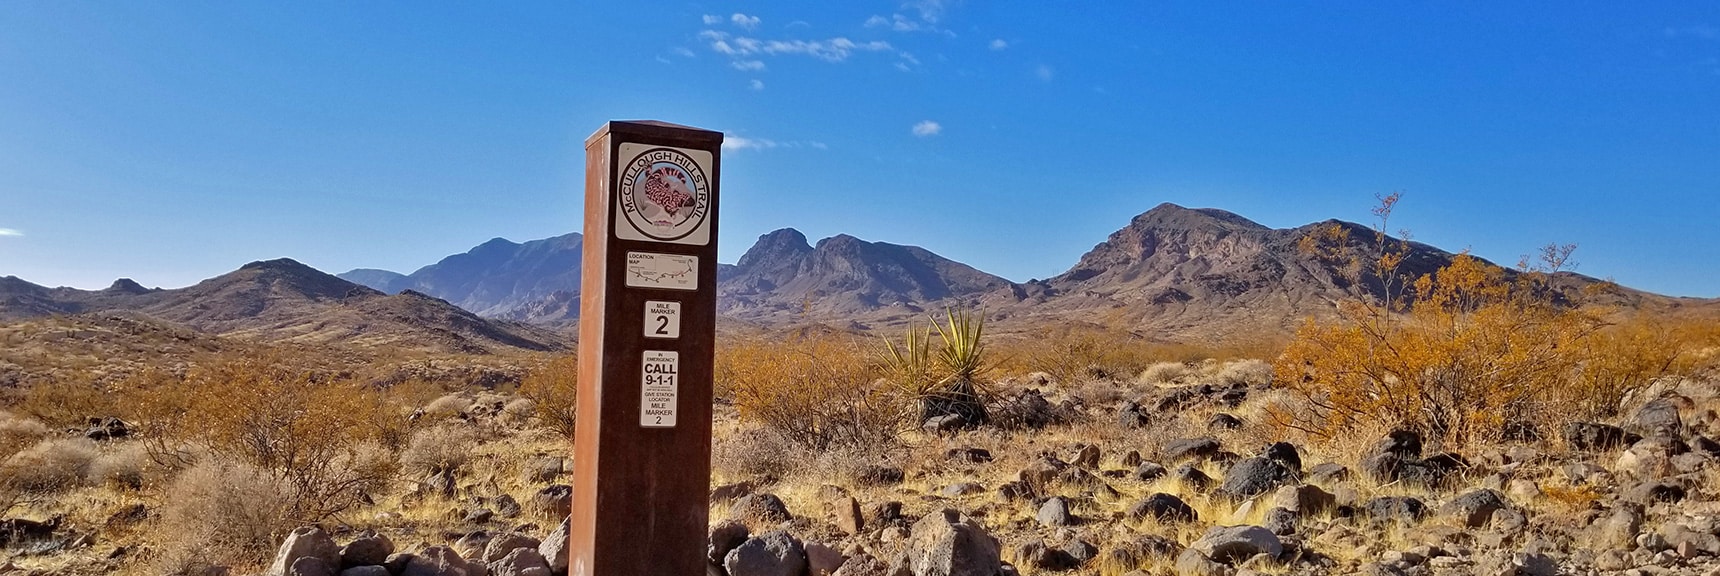 Mile 2 Marker, Evidence of Ancient Volcanic Action | McCullough Hills Trail in Sloan Canyon National Conservation Area, Nevada